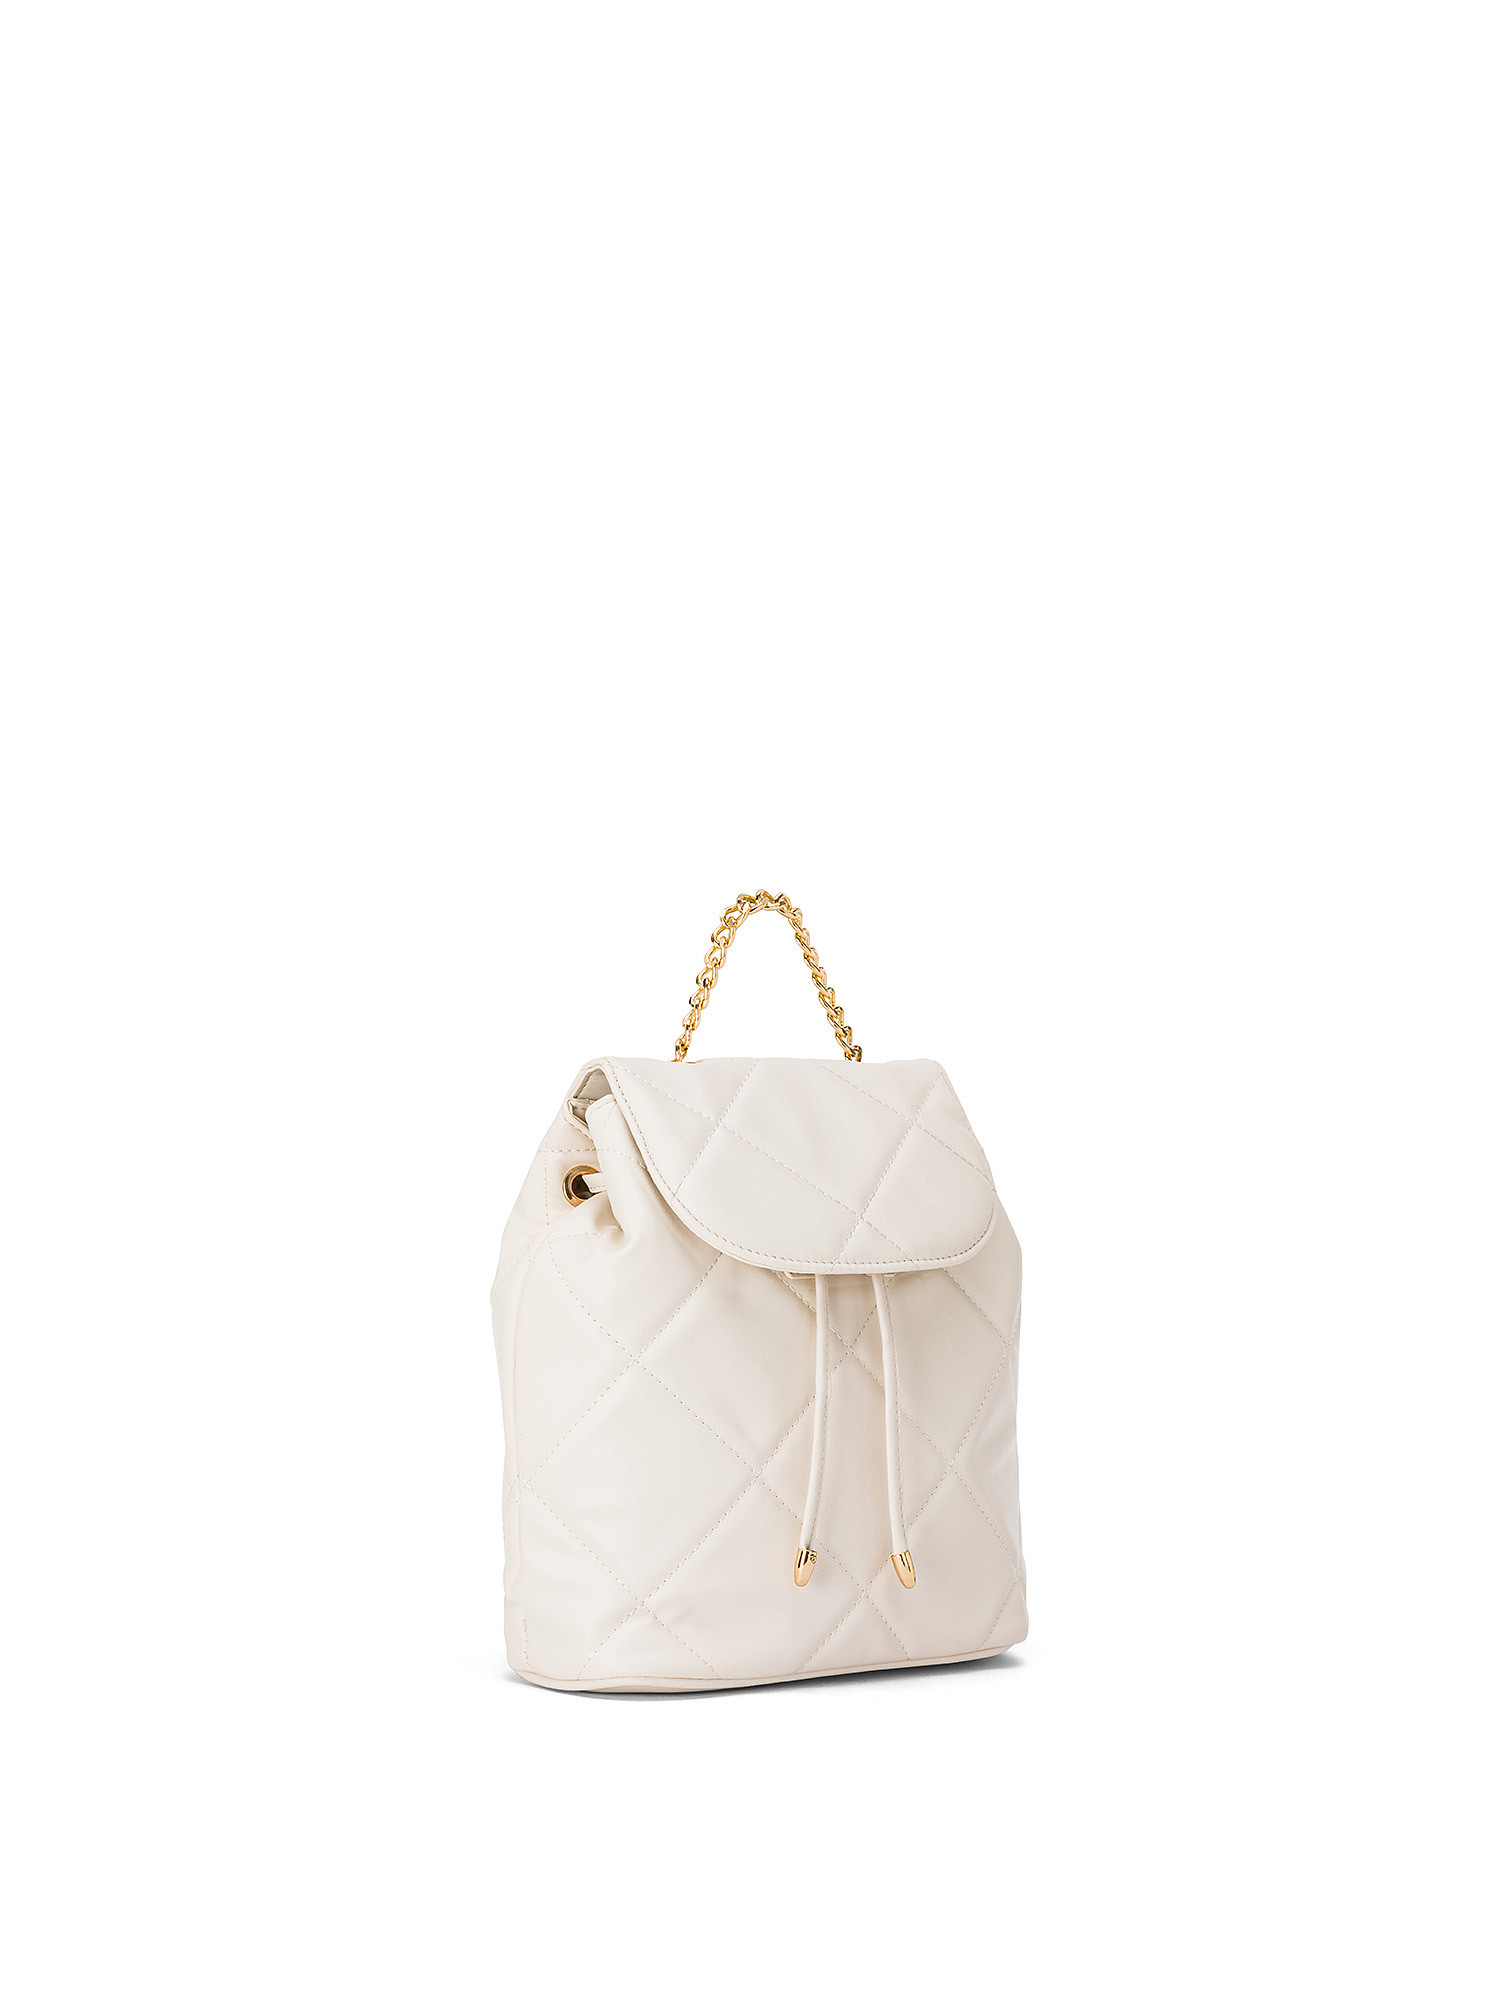 Koan - Quilted backpack with chain, White, large image number 1